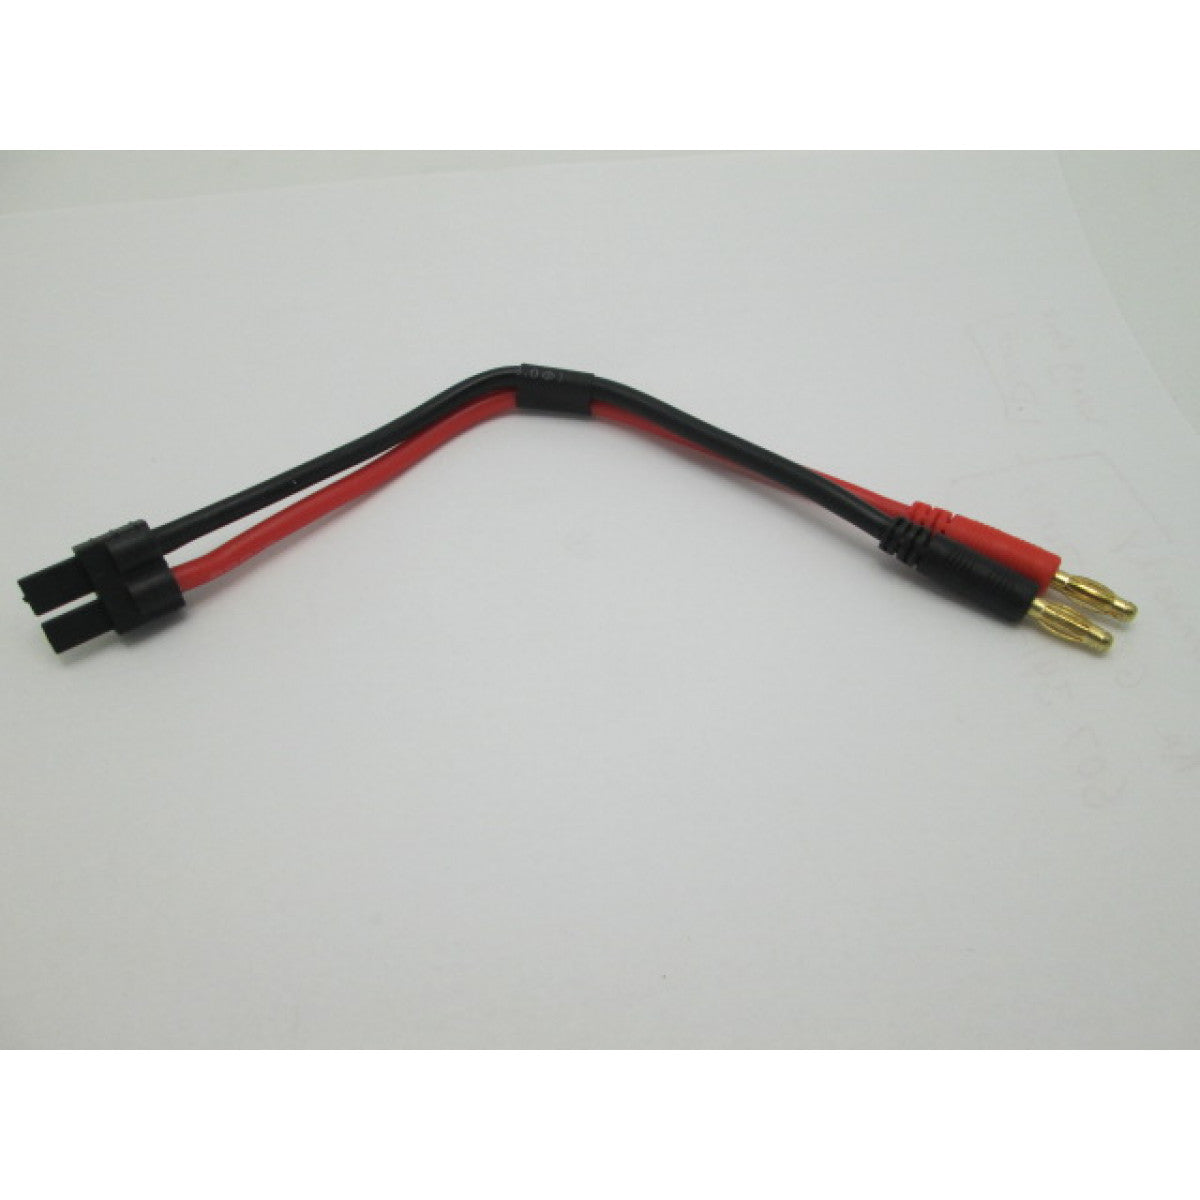 SMC Traxxas Charge Cable (4mm Bullets)